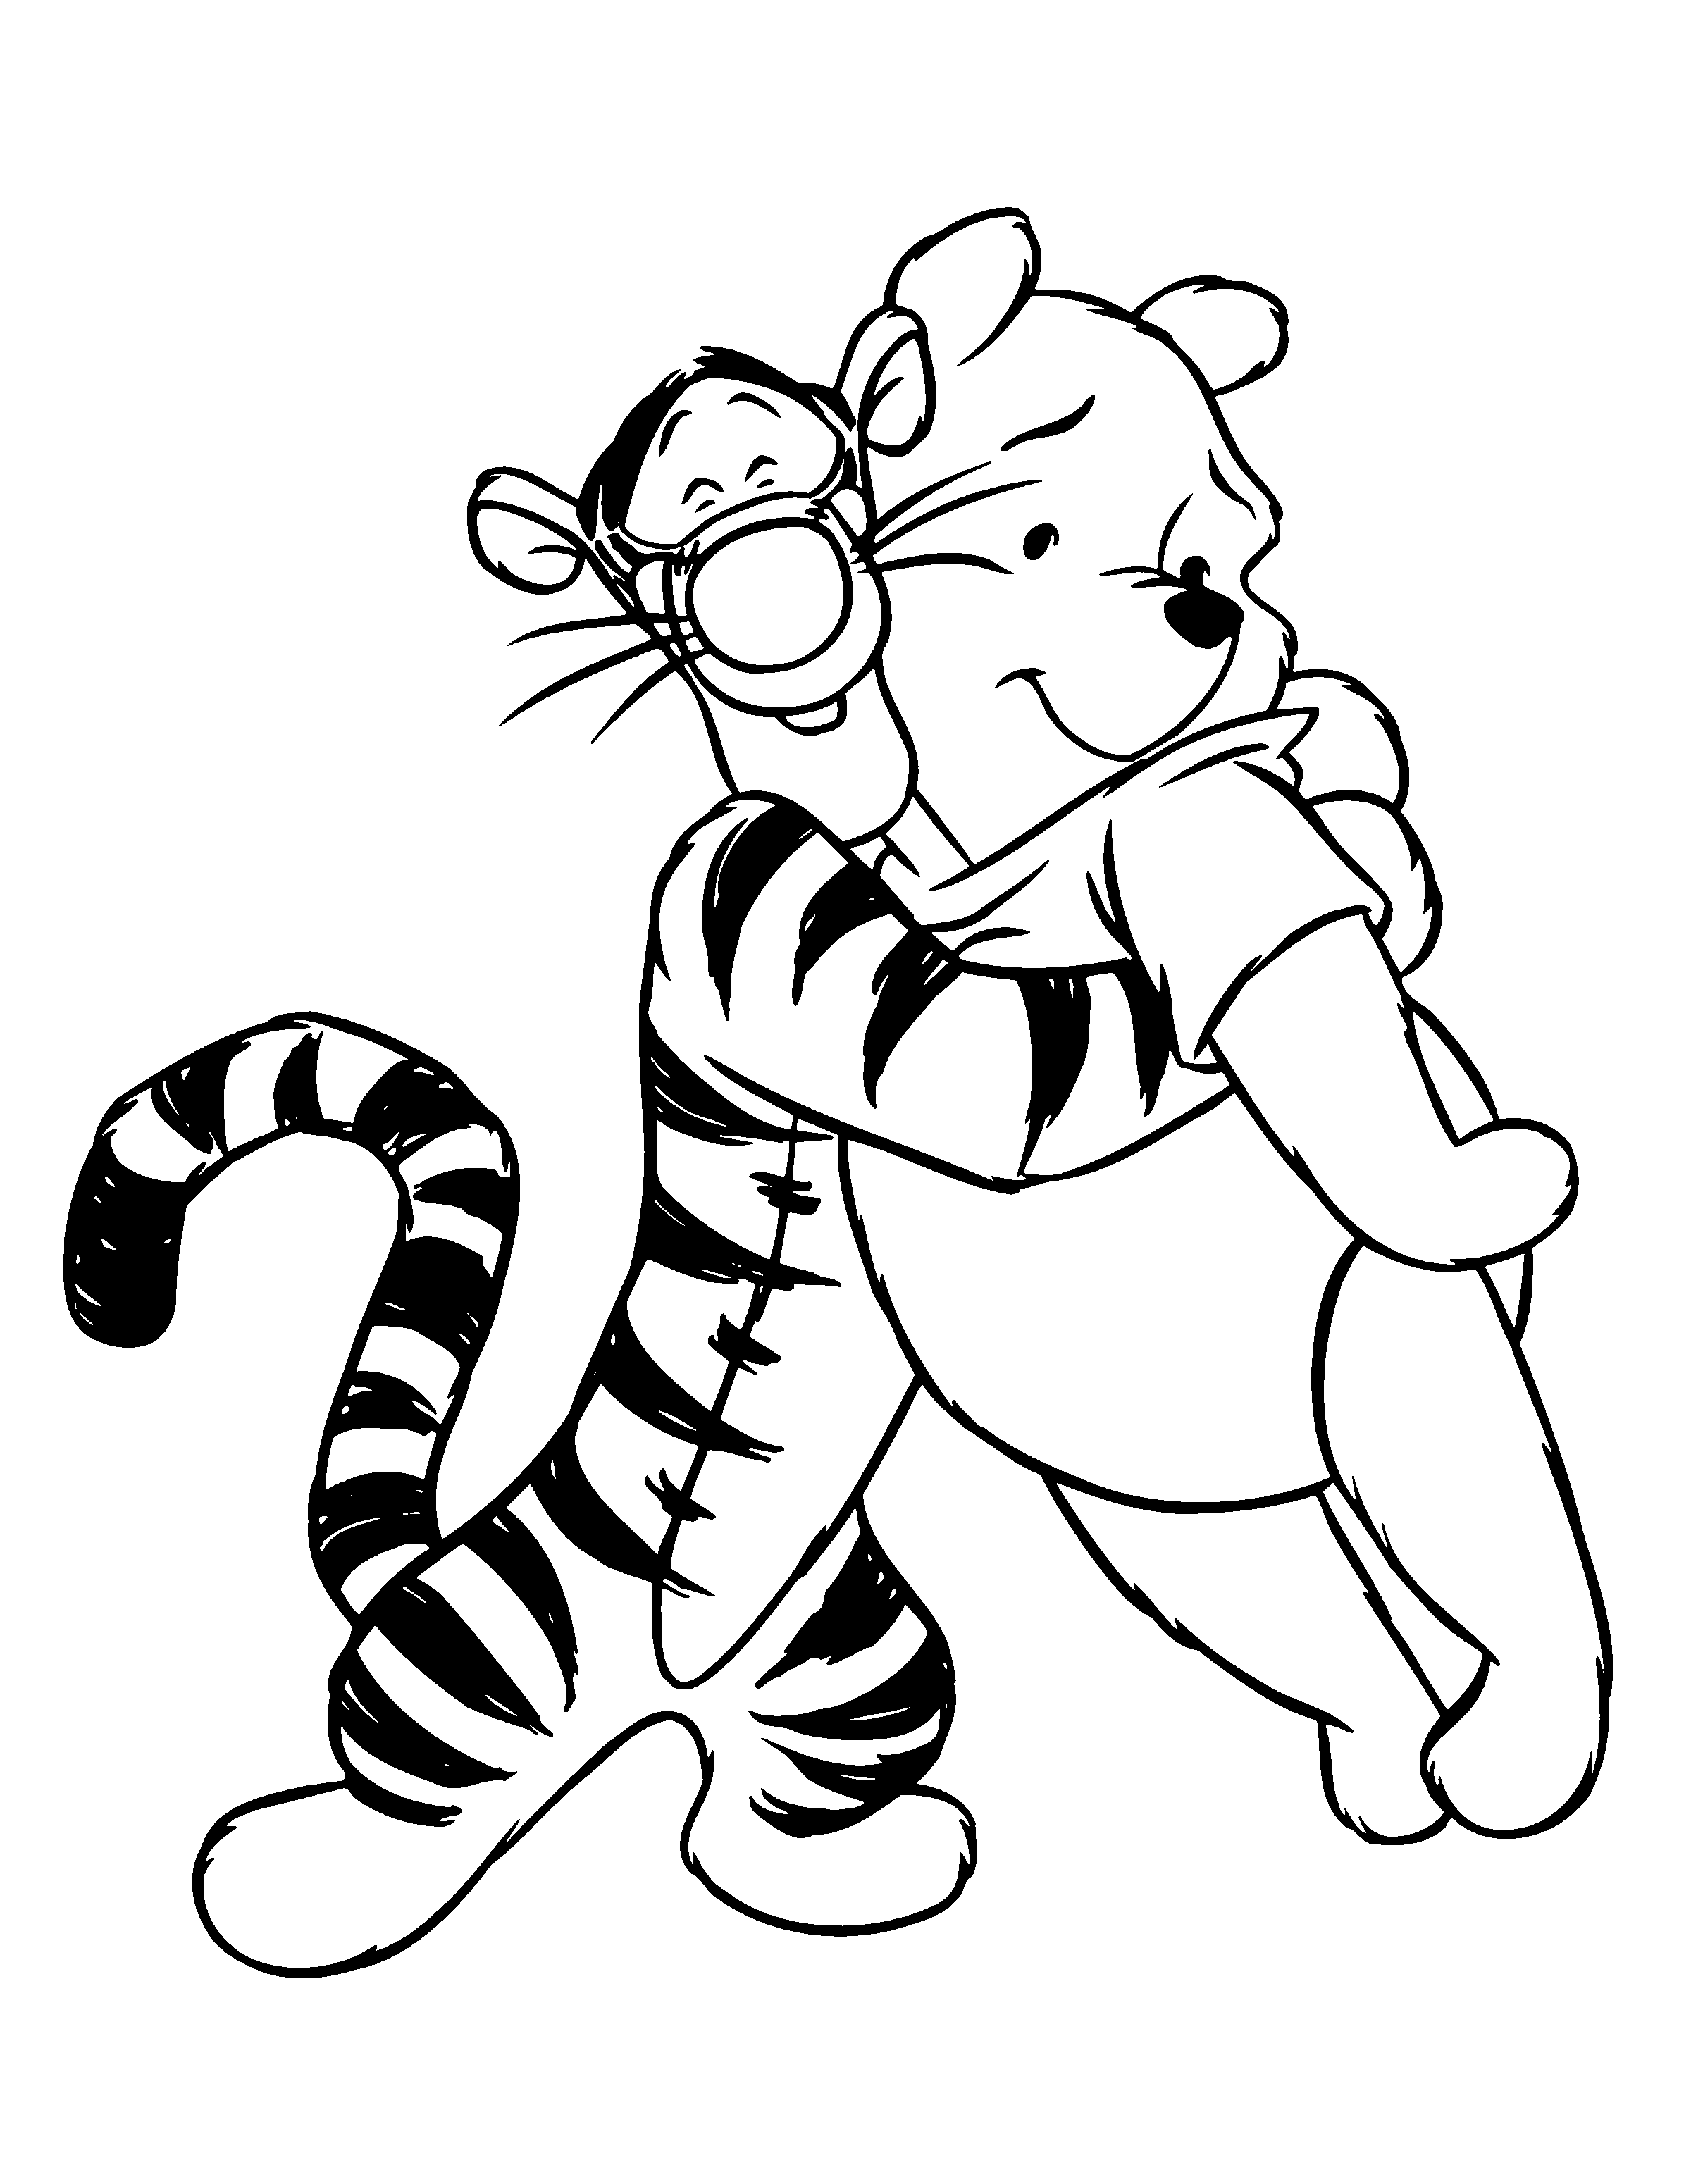 Pooh And Tigger Are Friends Coloring Page